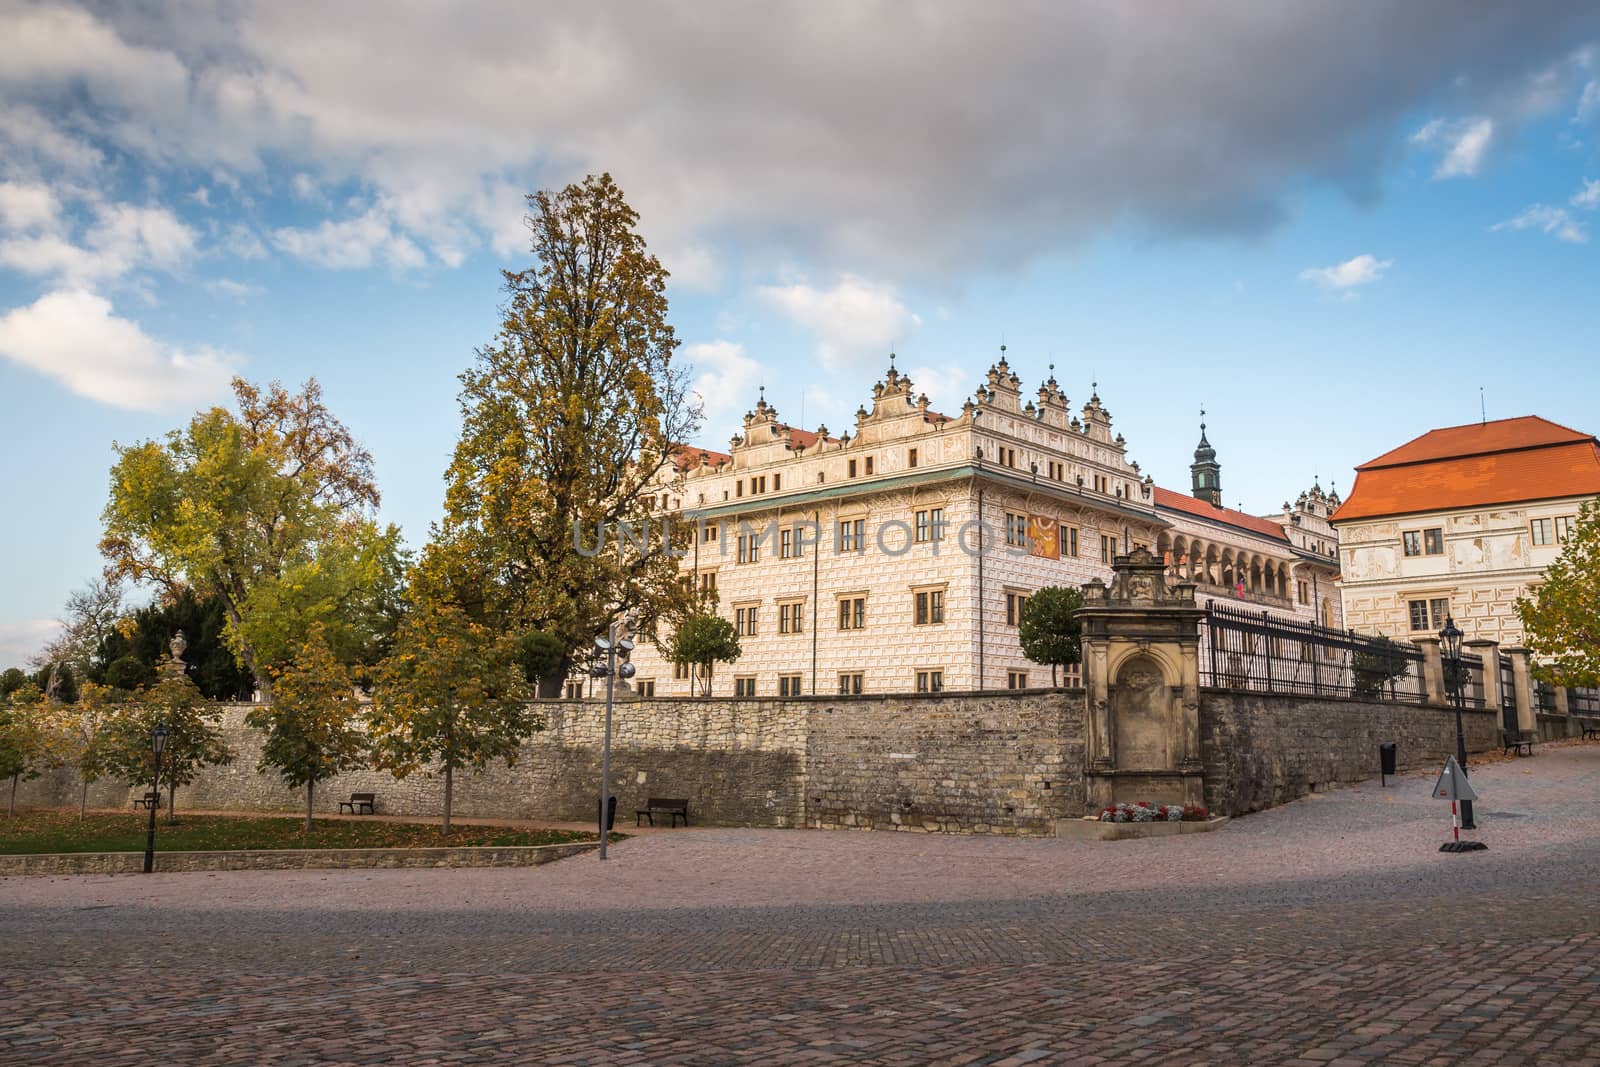 View of Litomysl Castle, one of the largest Renaissance castles in the Czech Republic. UNESCO World Heritage Site. Sunny wethe wit few clouds in the sky. by petrsvoboda91